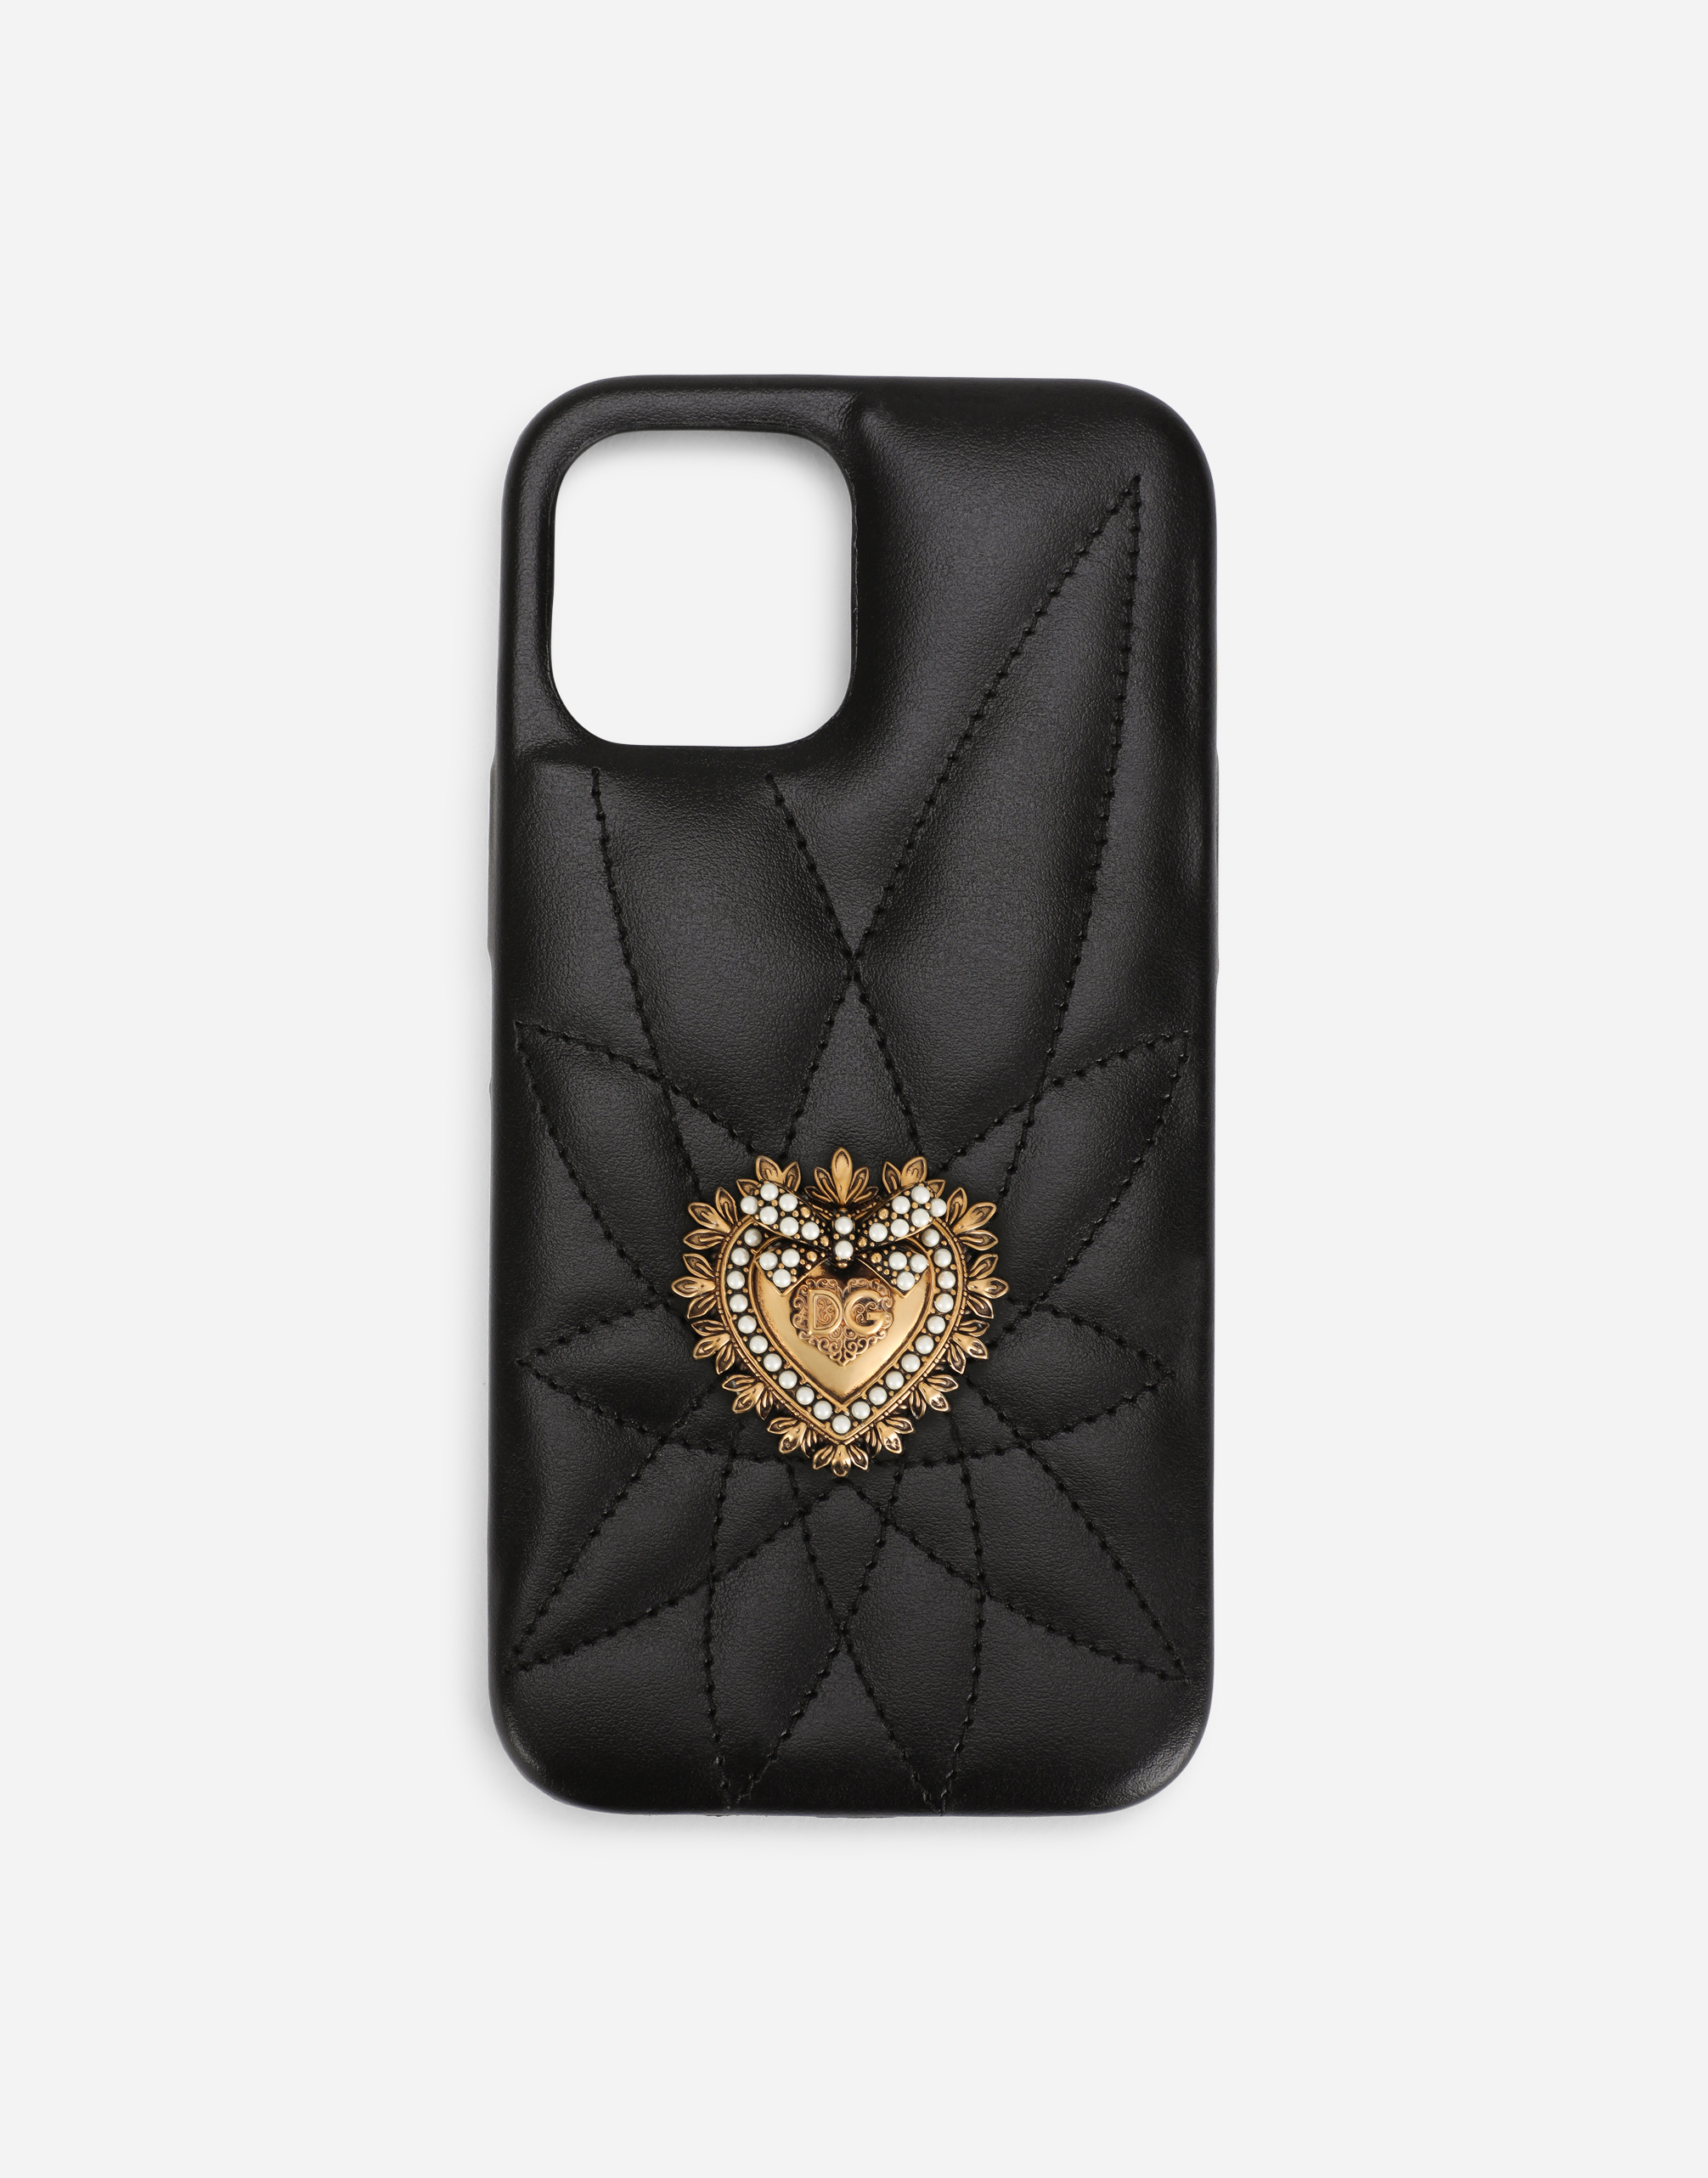 DOLCE & GABBANA QUILTED CALFSKIN DEVOTION IPHONE 12 PRO MAX COVER